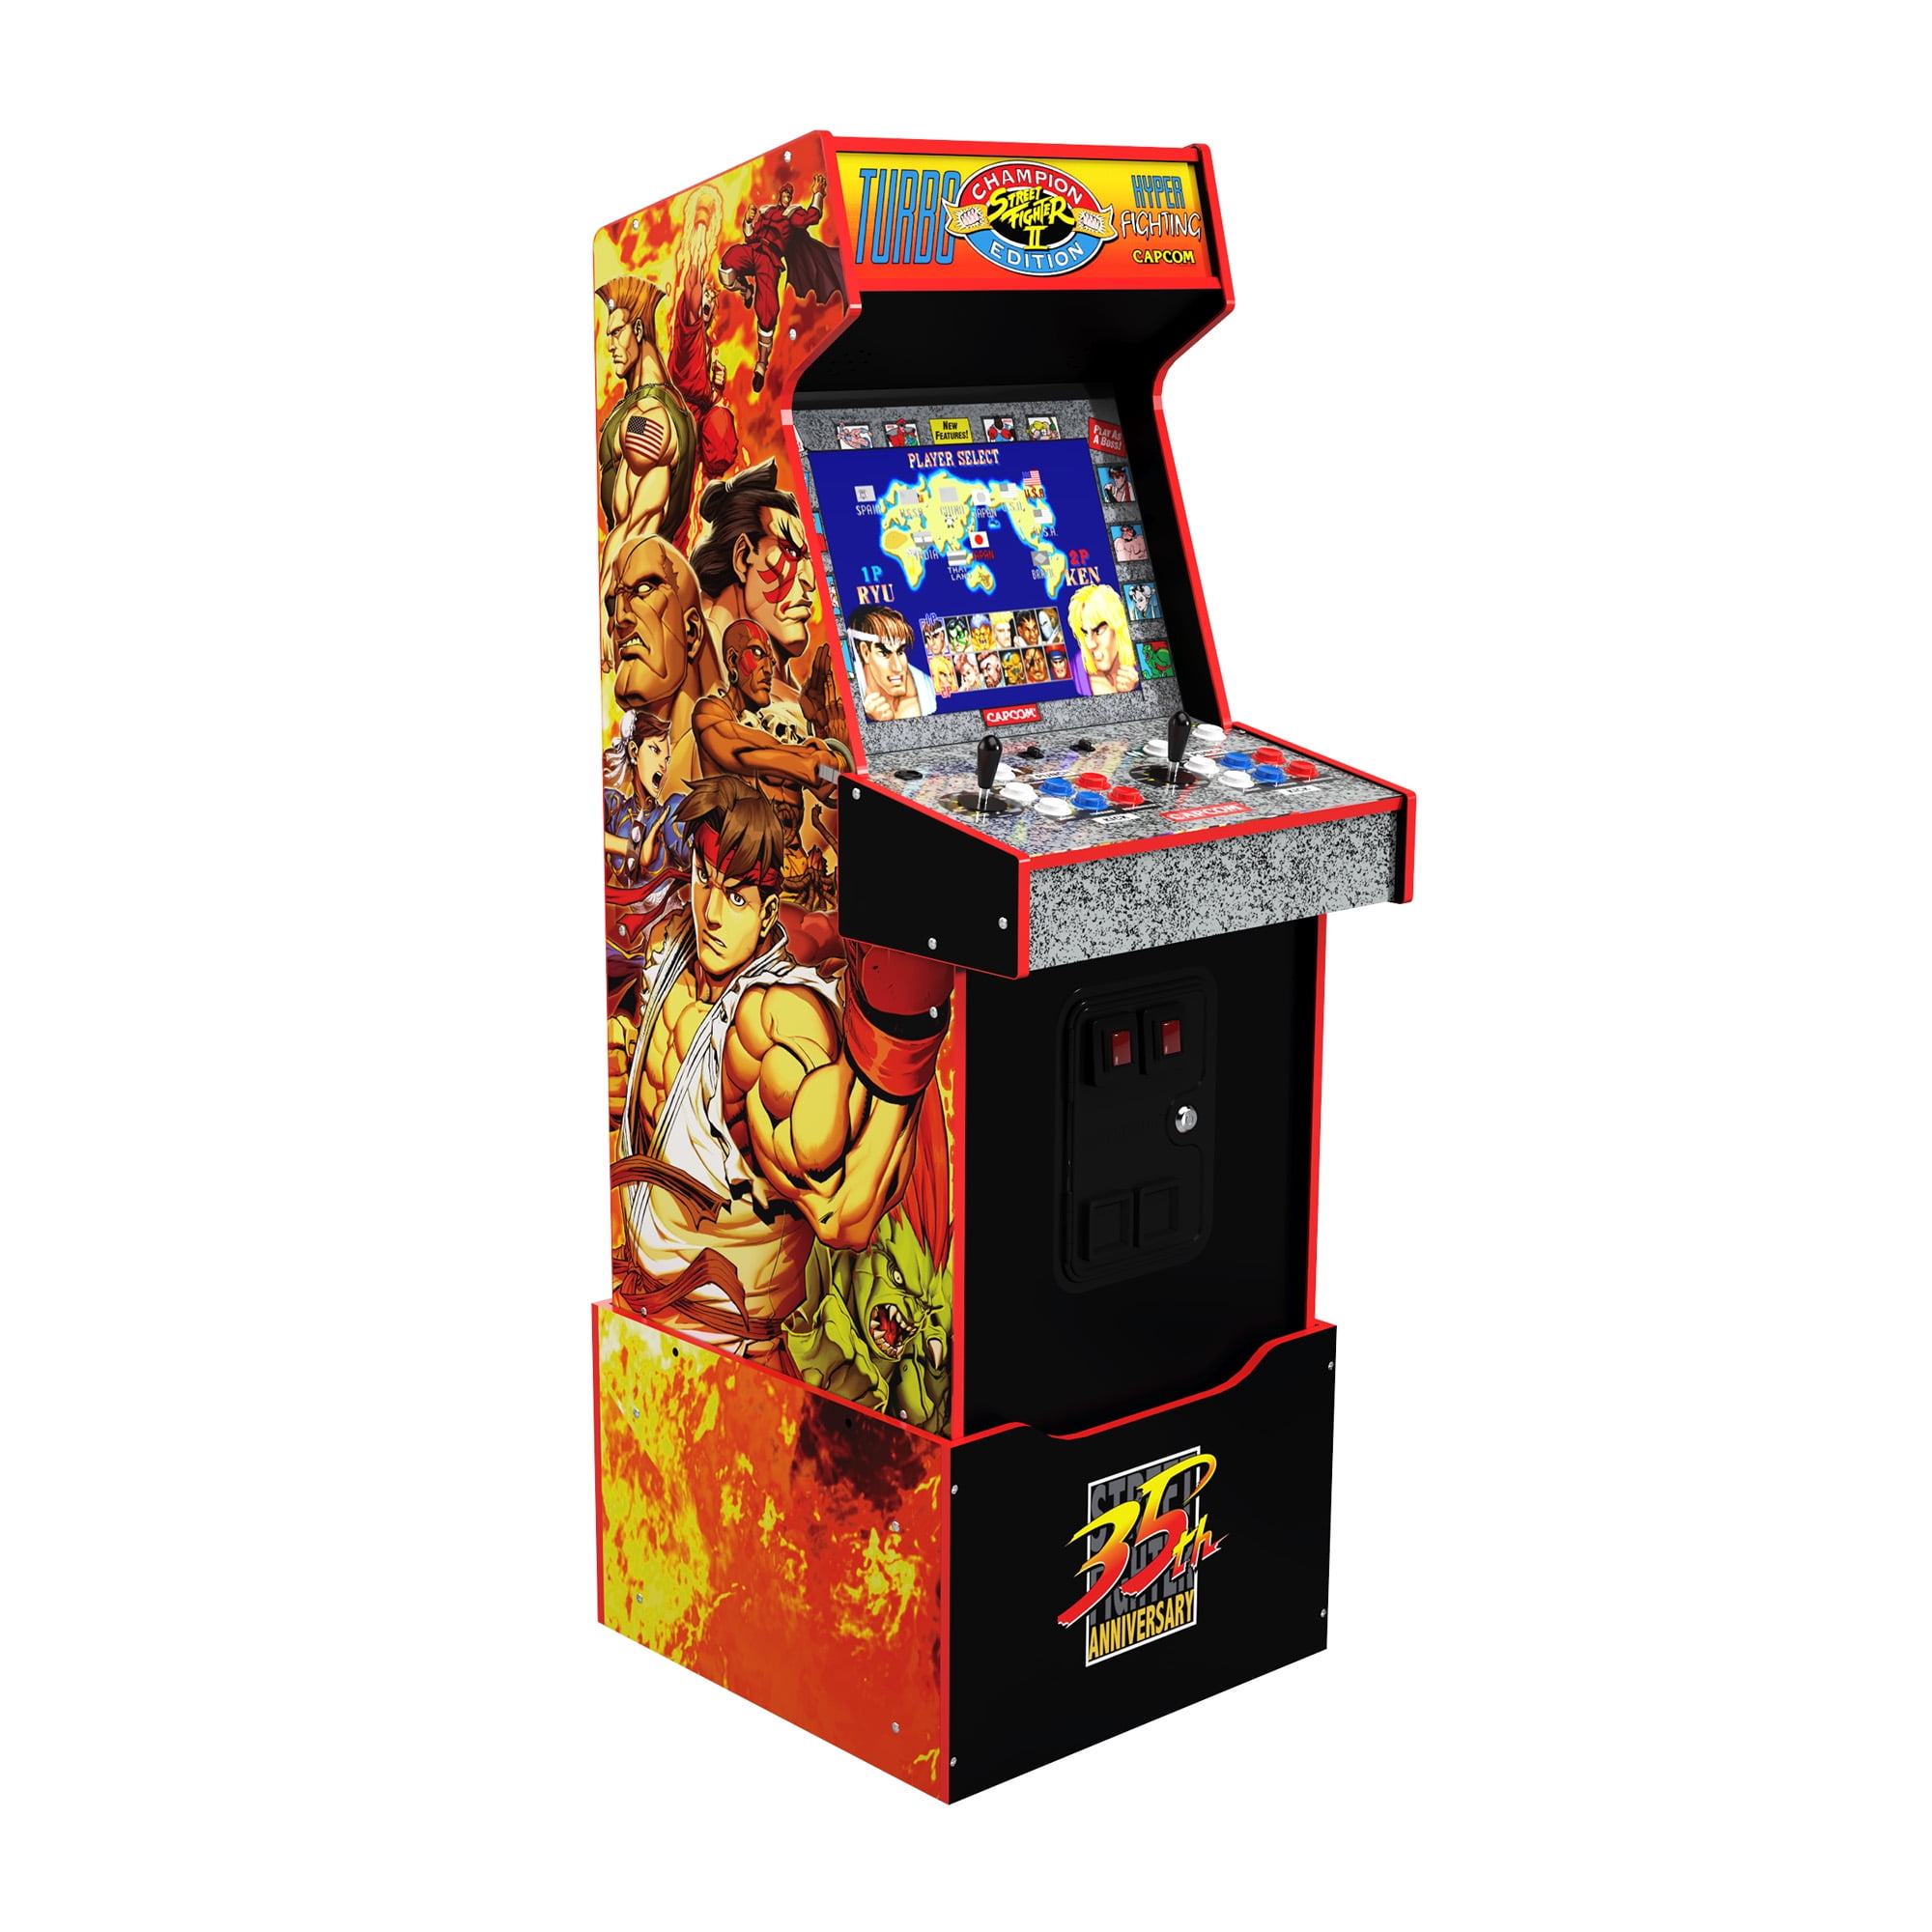 Projex Image Projecting Arcade Game for sale online 